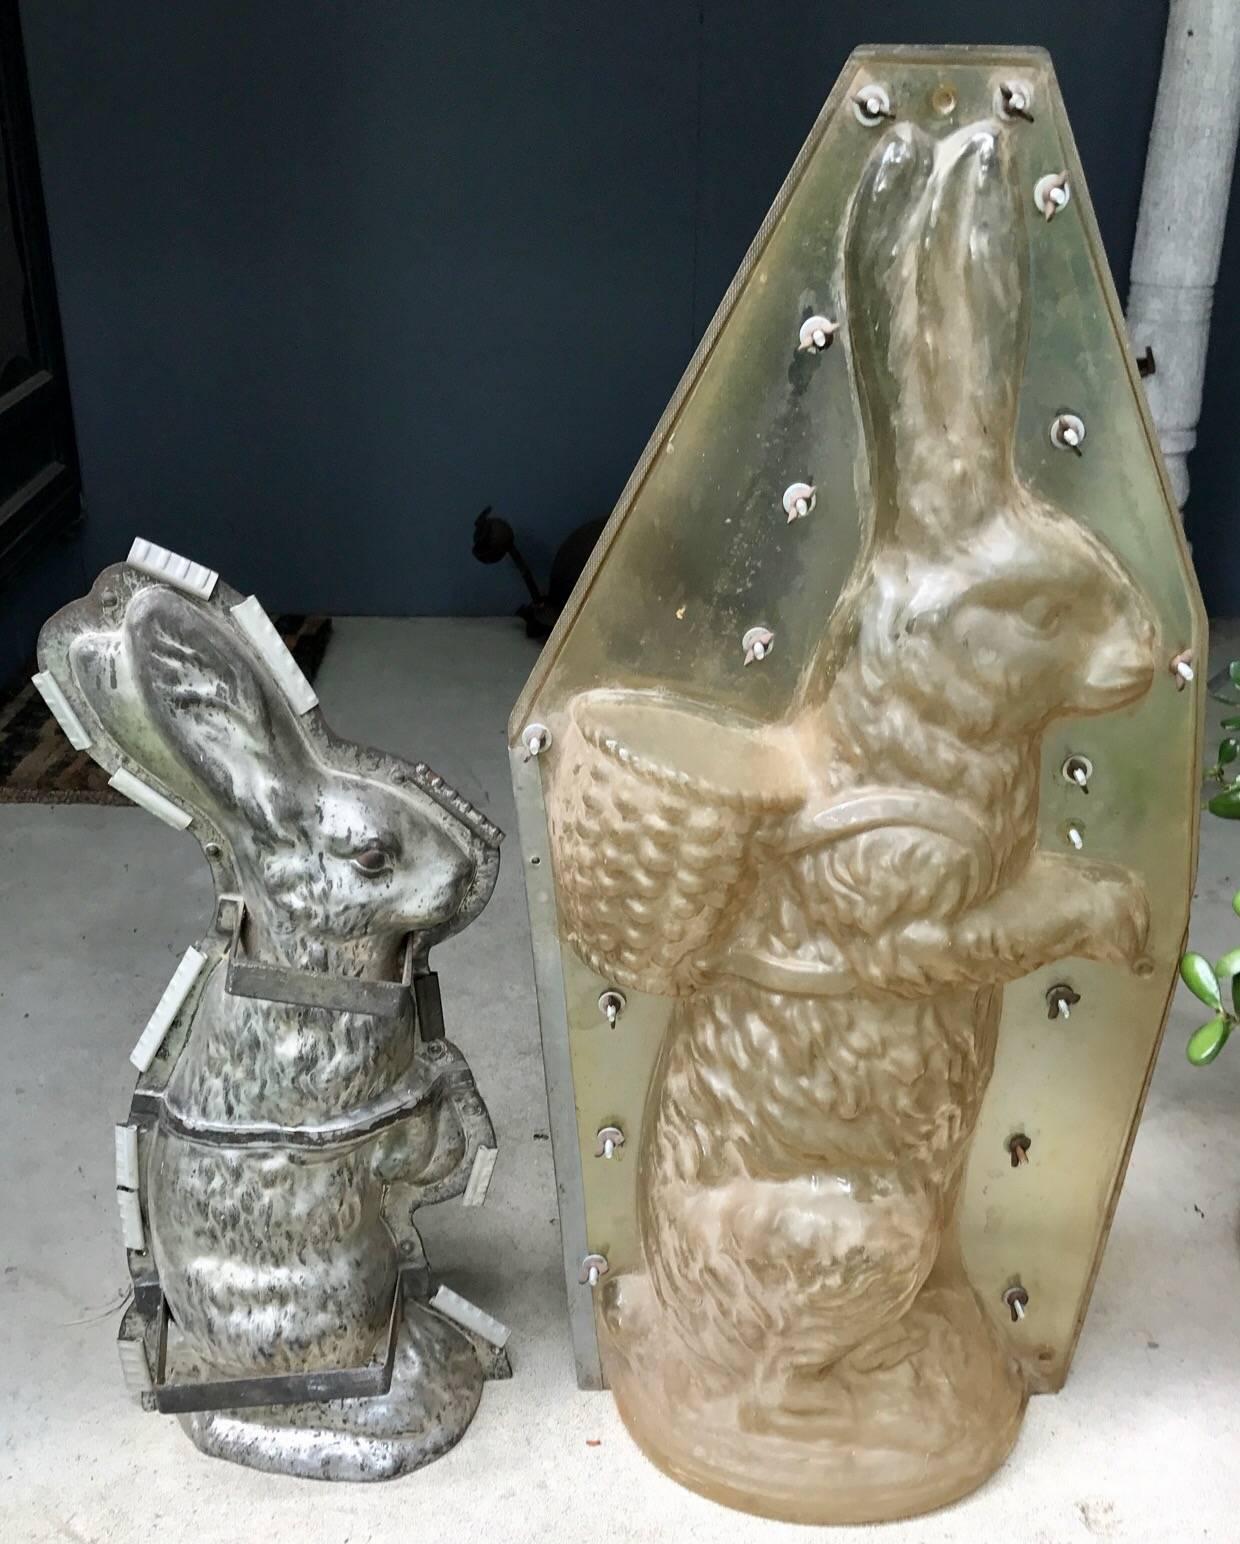 Rare large size chocolate molds.
The small rabbit is 27